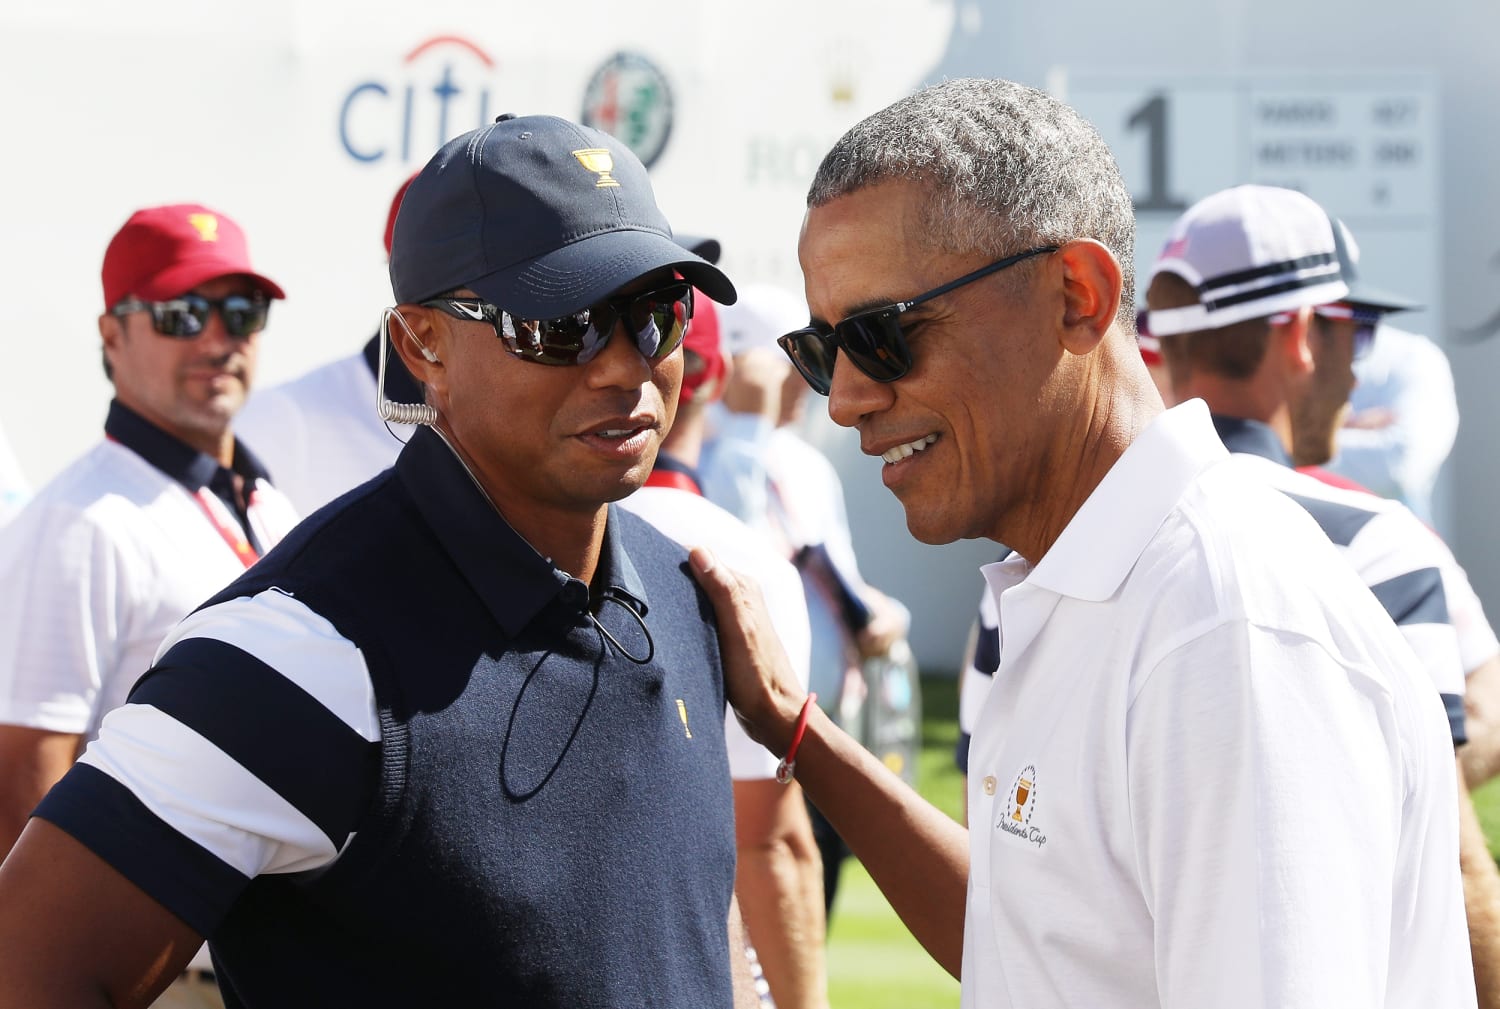 Obama, Bush and Clinton reunite for epic hangout at Presidents Cup